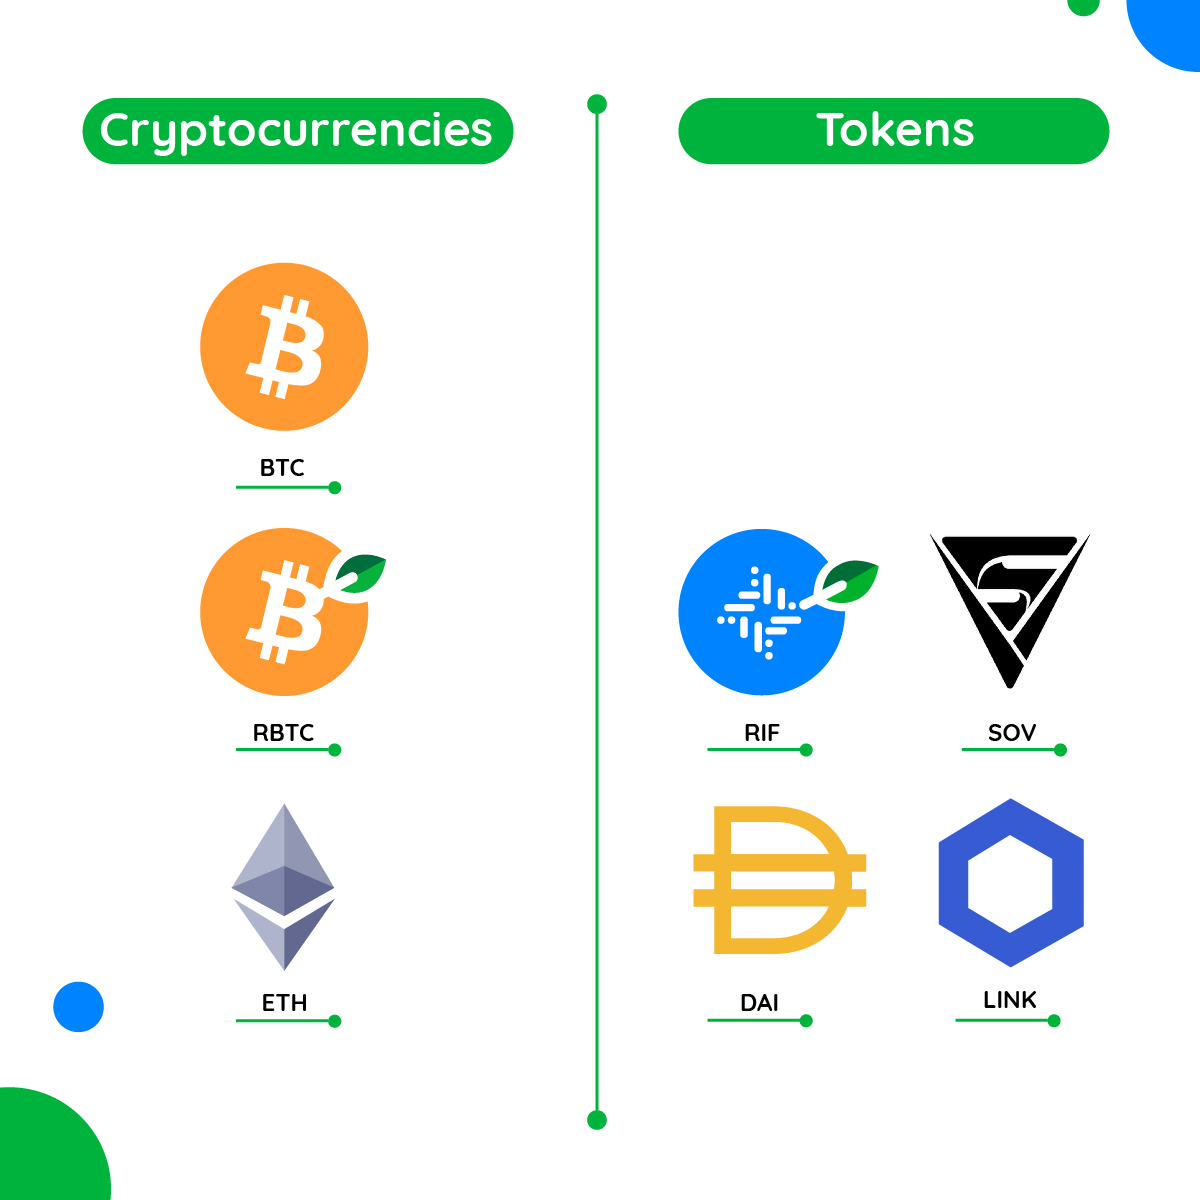 Crypto Coin vs Crypto Token: Understanding the Difference